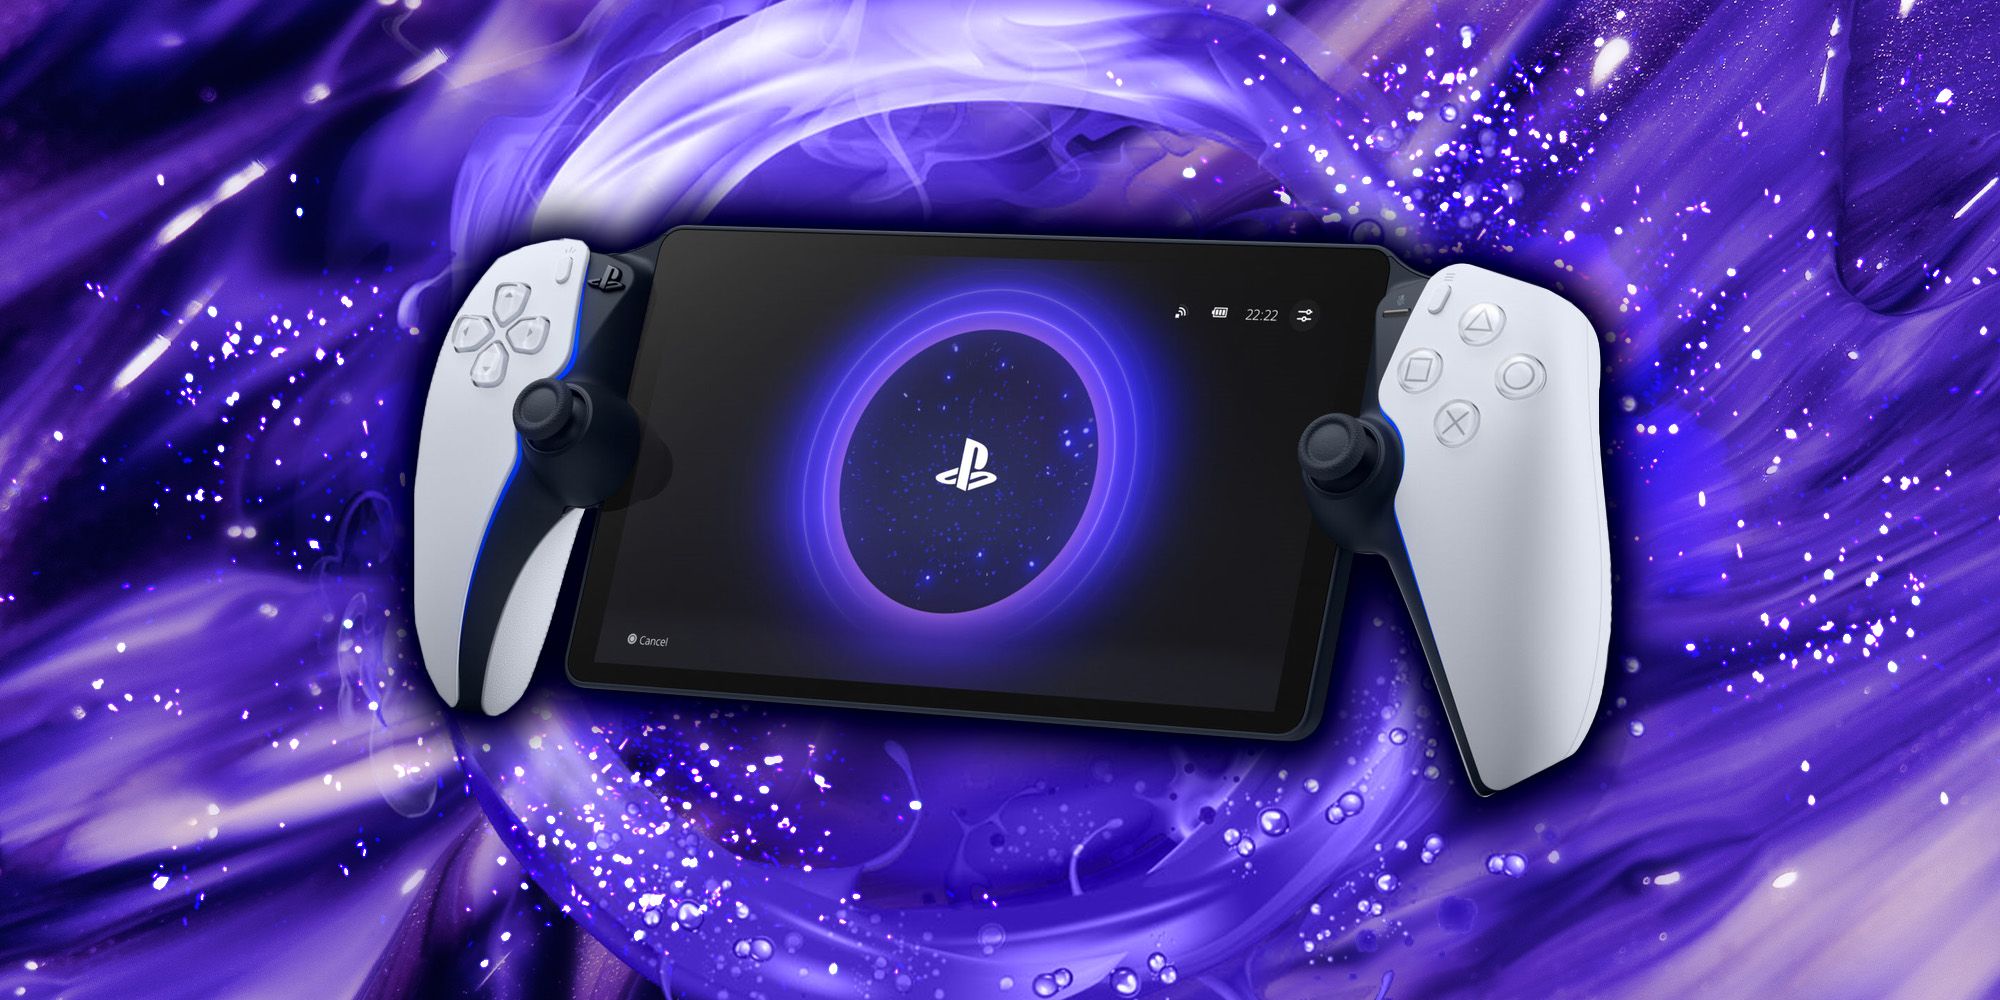 PlayStation Portal Review: a Cool Handheld for PS5 Owners, but Its